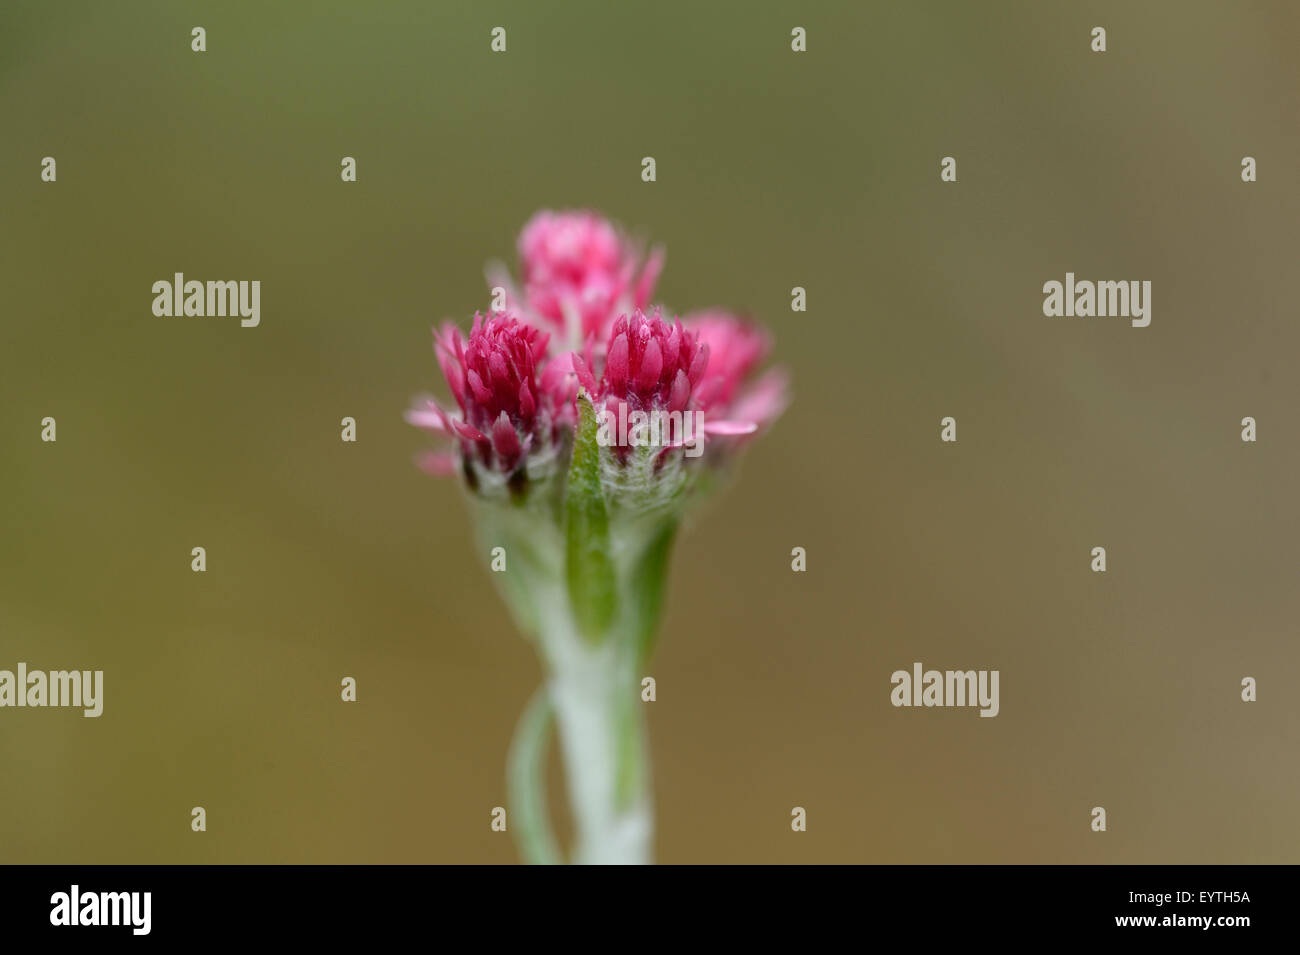 Common cat's paws, Antennaria dioica, blossom, Rose, close-up Stock Photo